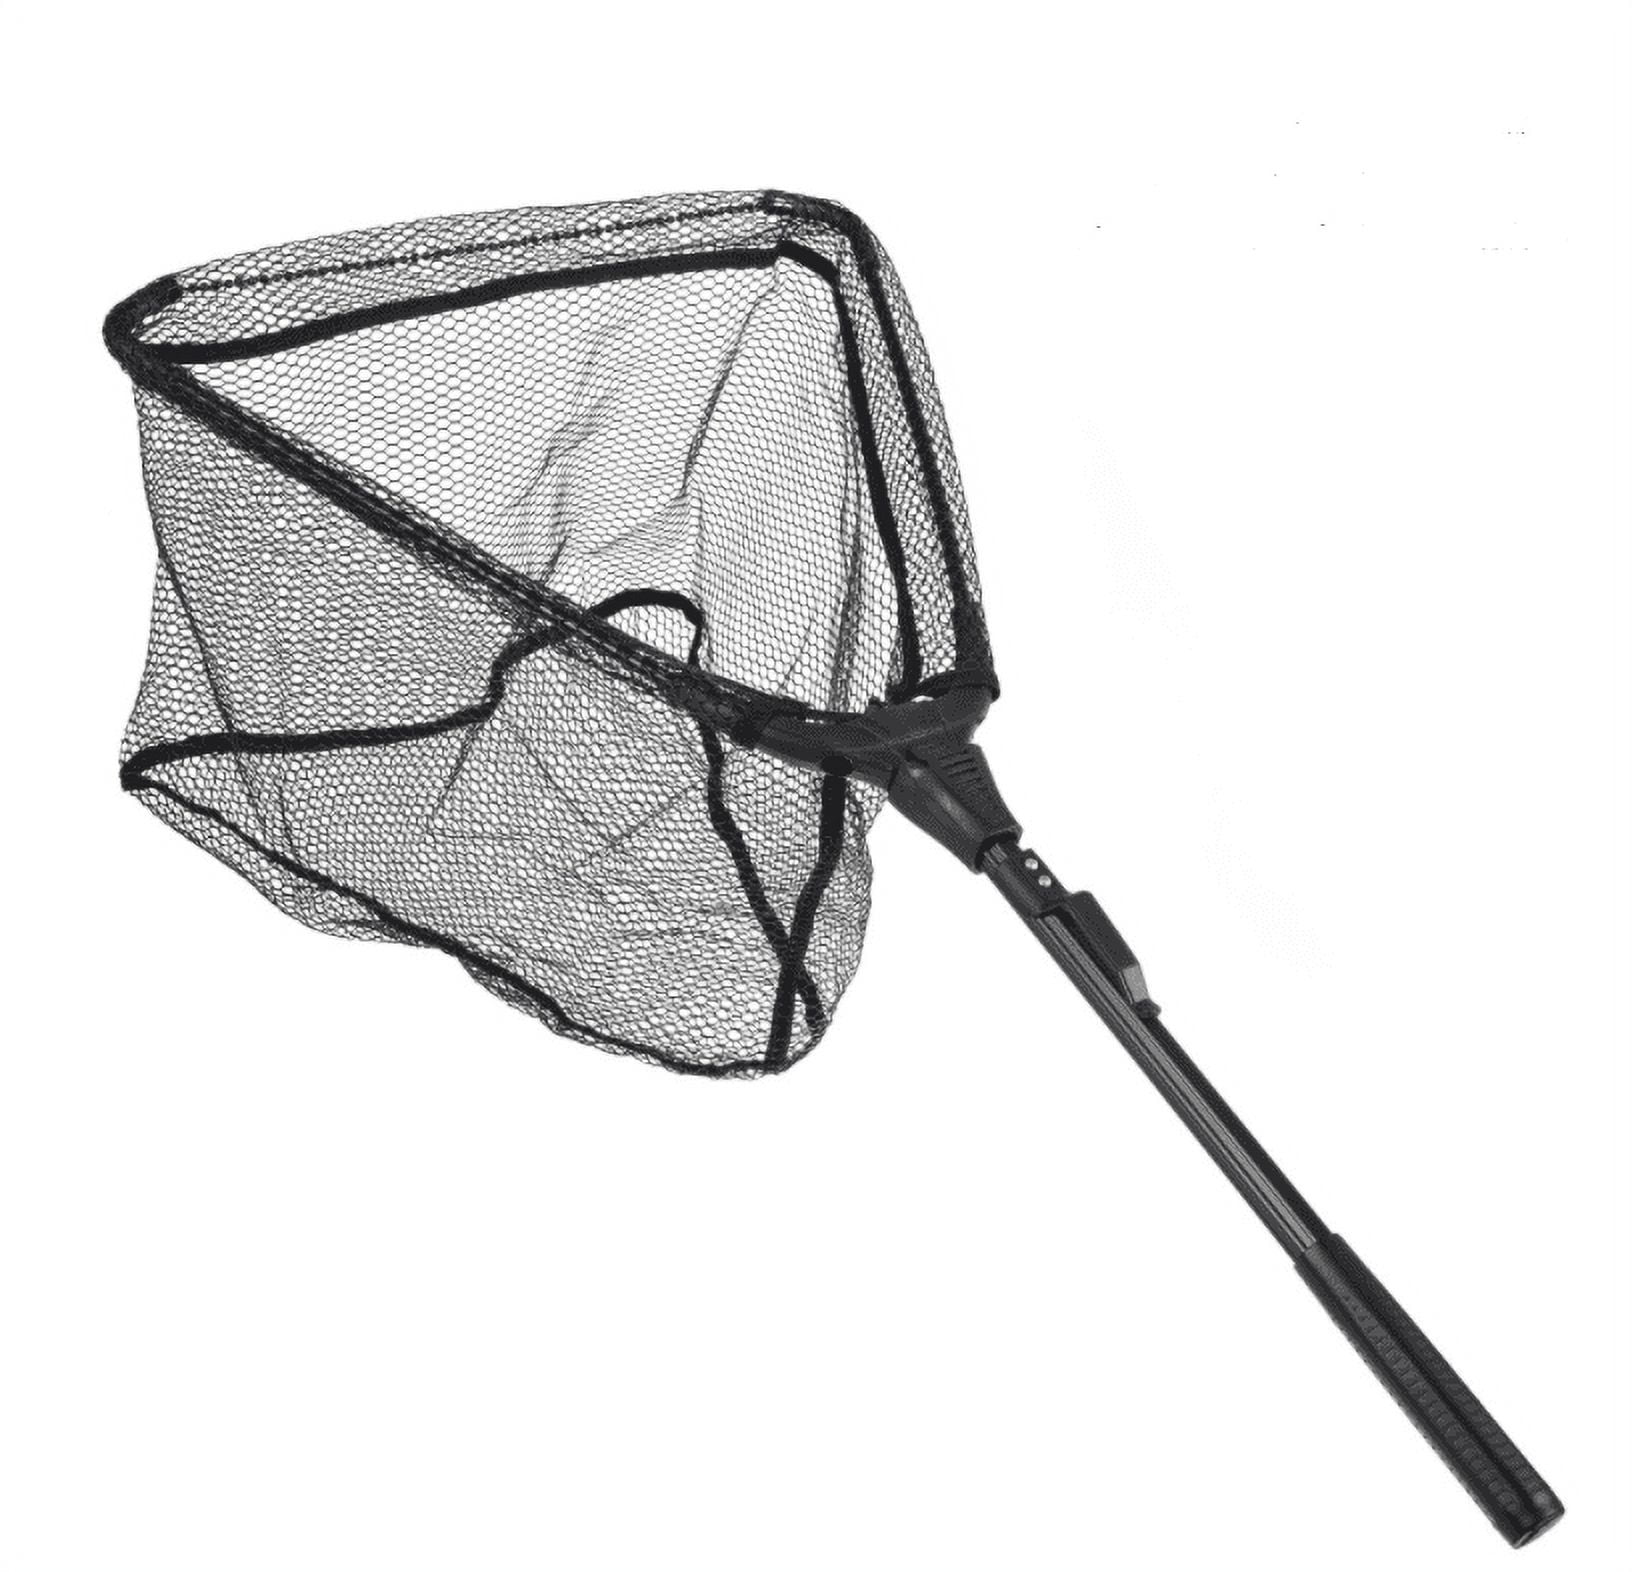 Fish Landing Net Portable Triangle Fish Nets With Telescoping Pole Fishing  Supplies Catch Net For Beginners Or Fishing - AliExpress